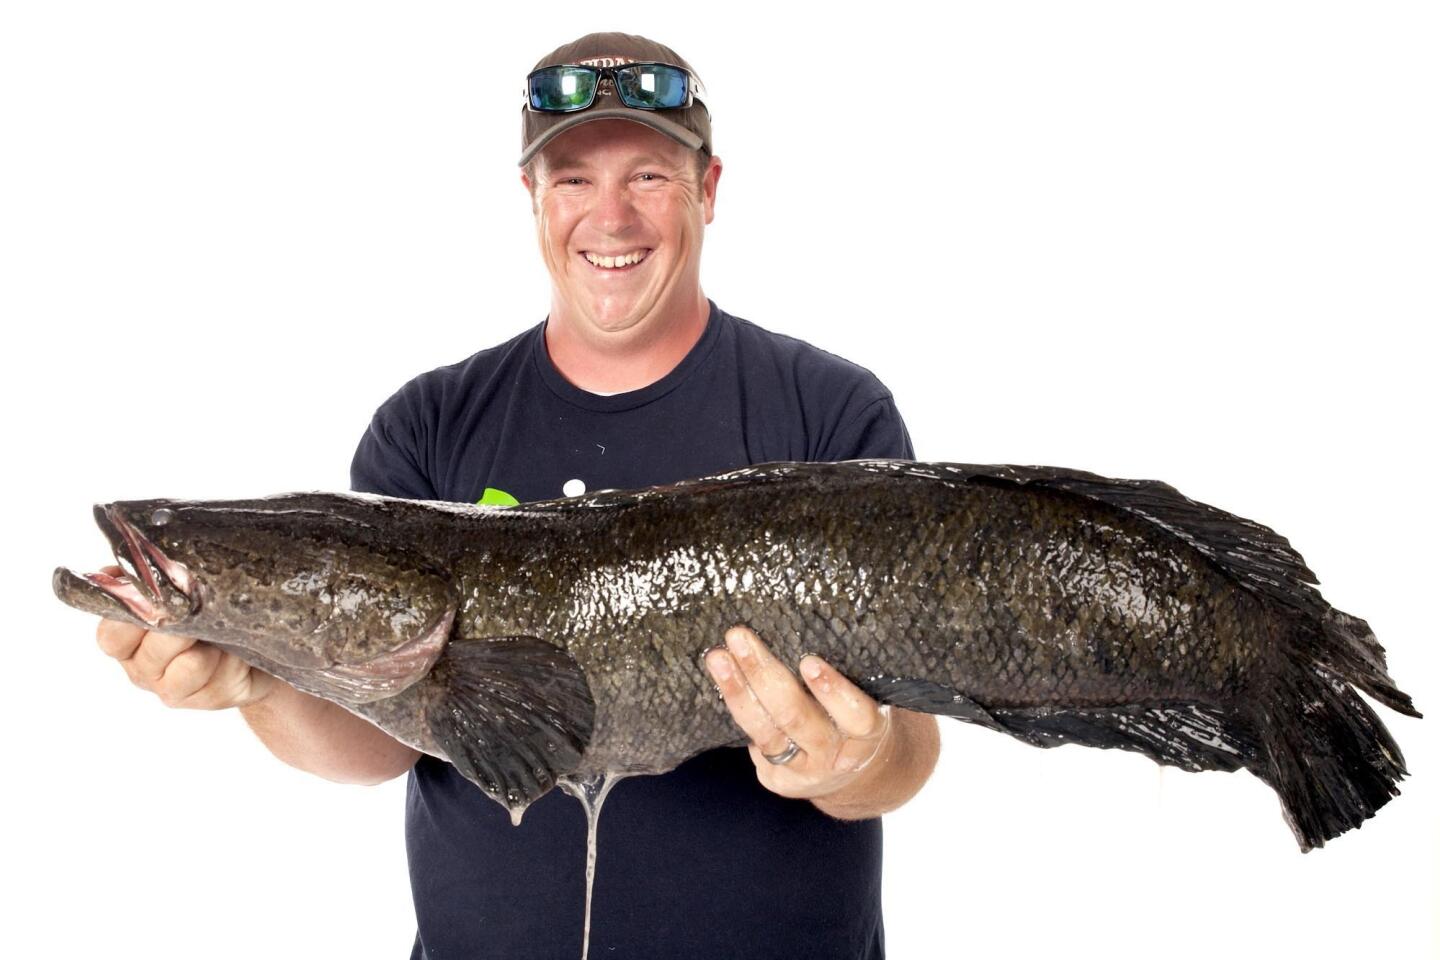 Angler's 17-plus-pound snakehead fish declared a world record - Los Angeles  Times